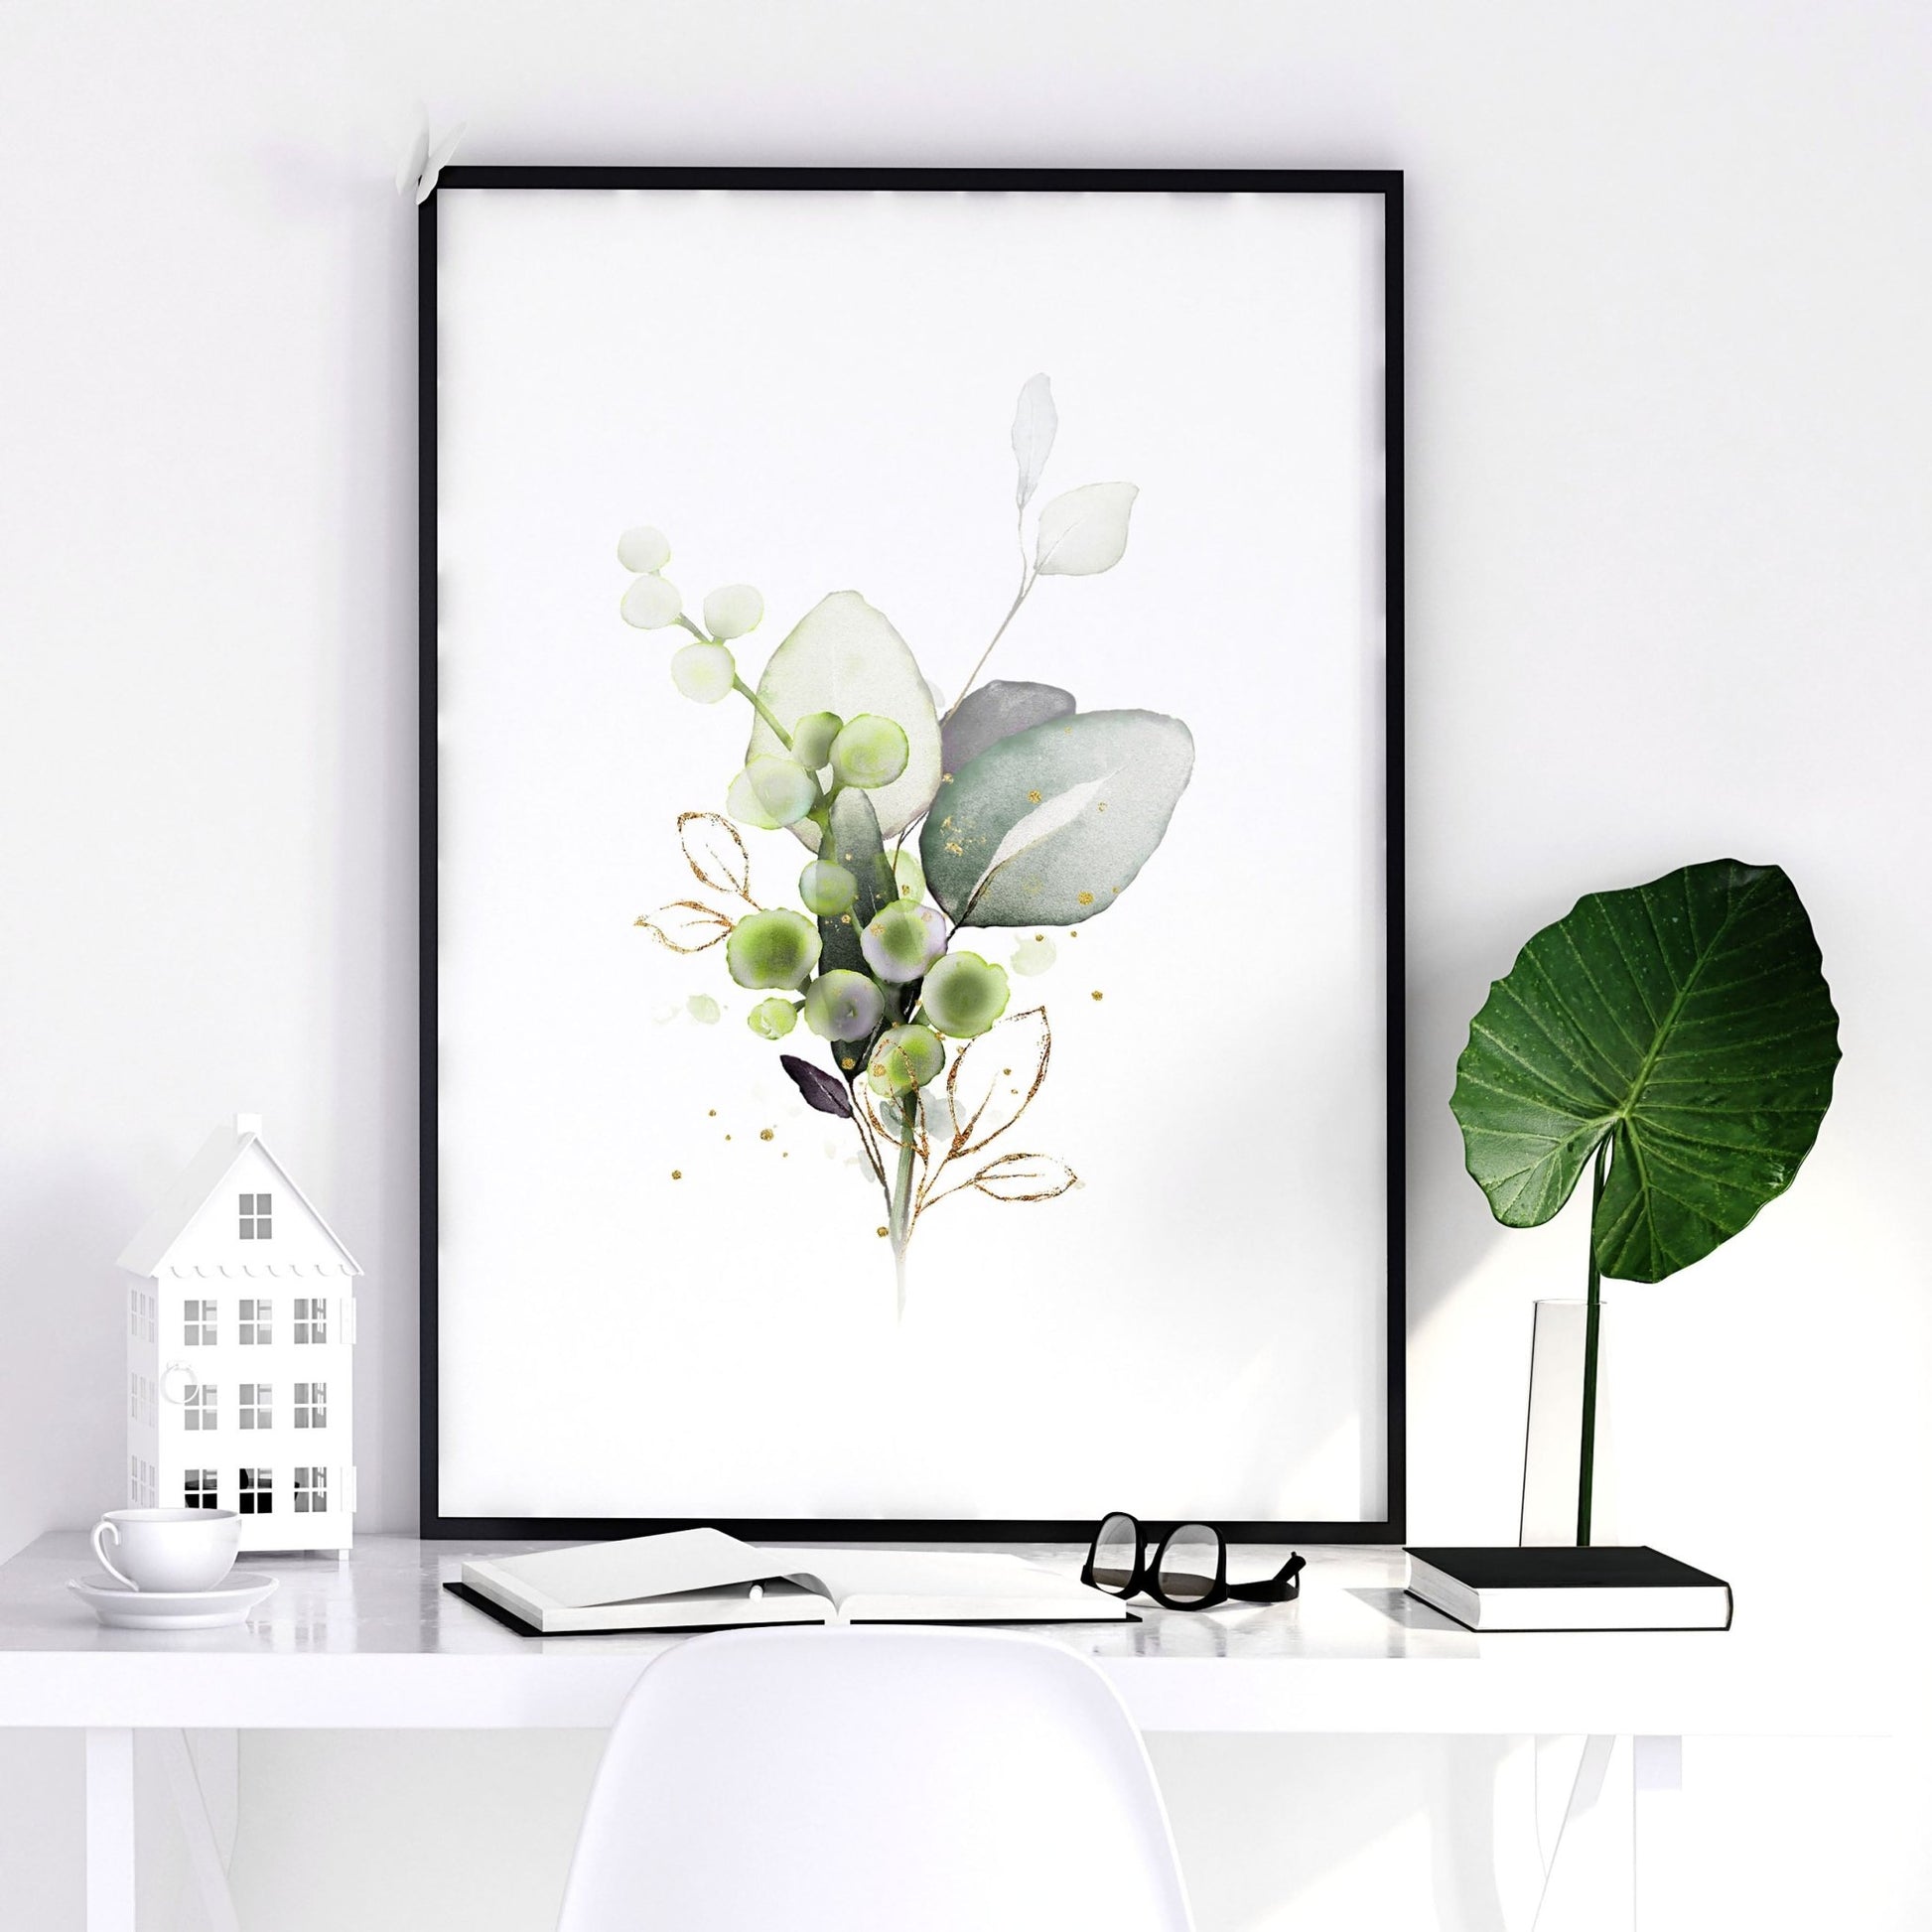 Bedroom decor for walls | set of 3 wall art prints - About Wall Art